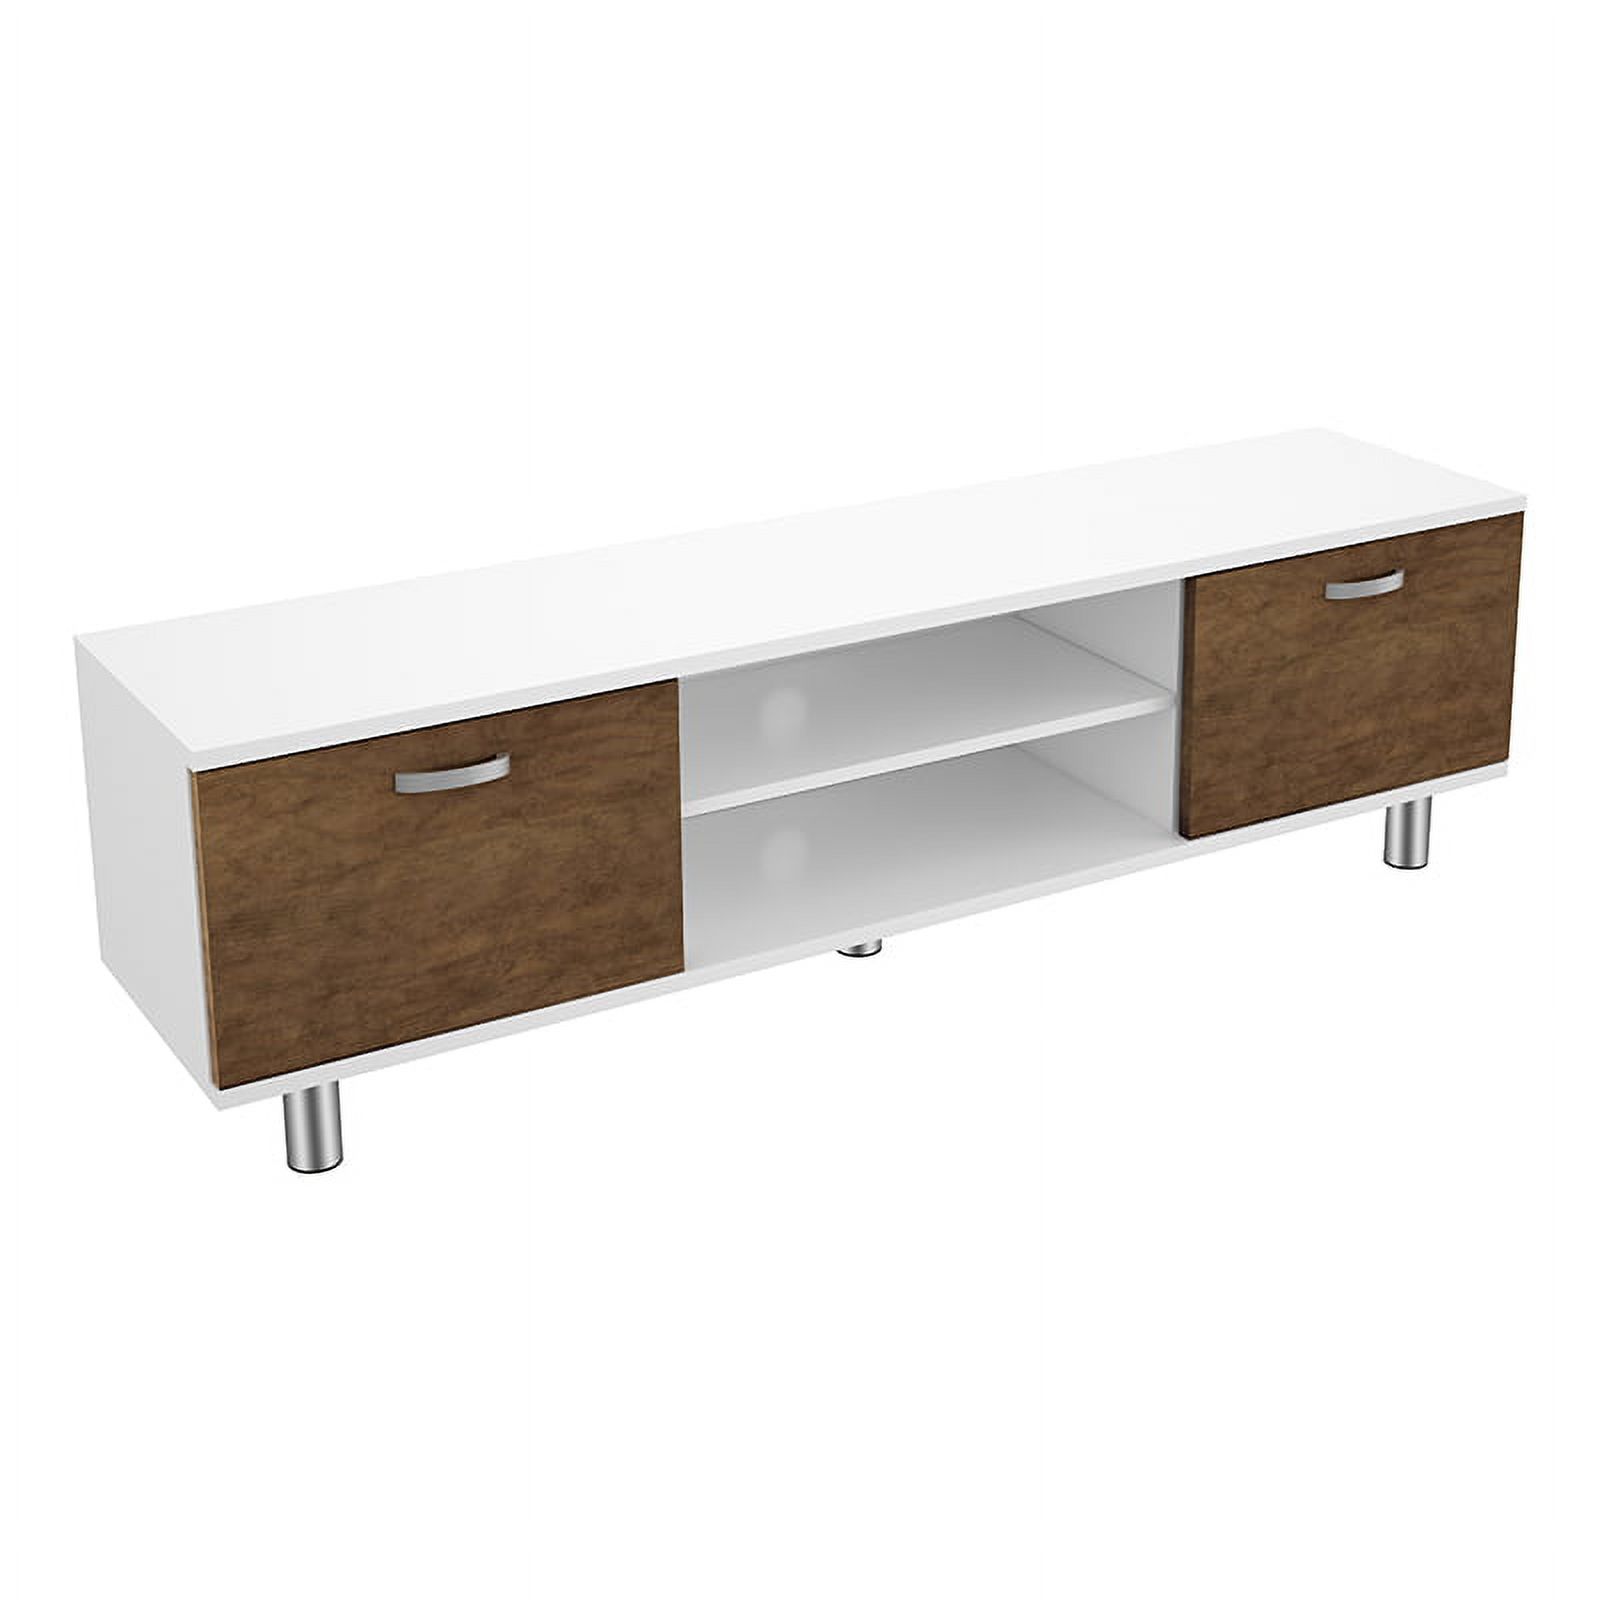 FS1500MAHW-A TV Stand for TVs 32”, 37”, 39”, 40”, 42”, 46”, 47”, 50”, 52”, 55”, 58”, 60”, 65”, White Finish, plus Walnut Finish Doors, Includes Cable Management. - image 1 of 3